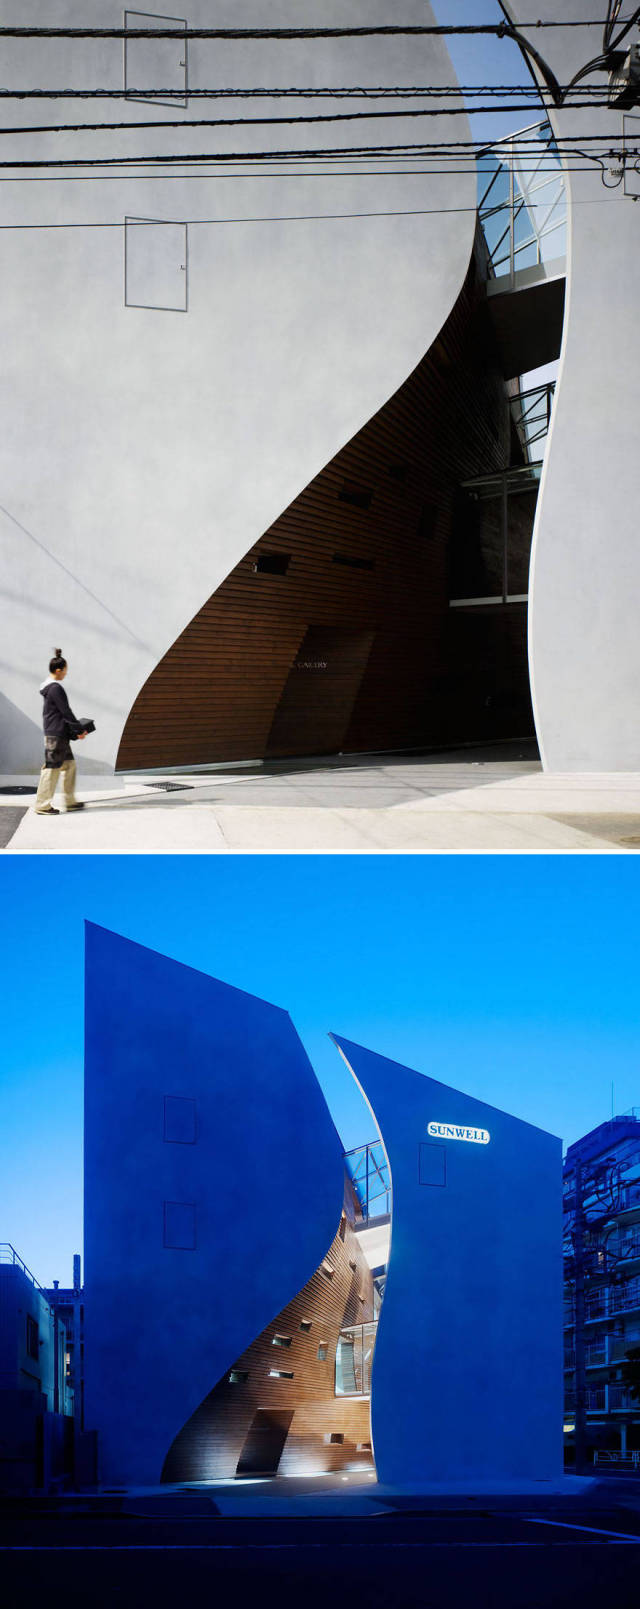 Seeing Modern Innovative Japanese Architecture Is Another Solid Reason To Visit Japan